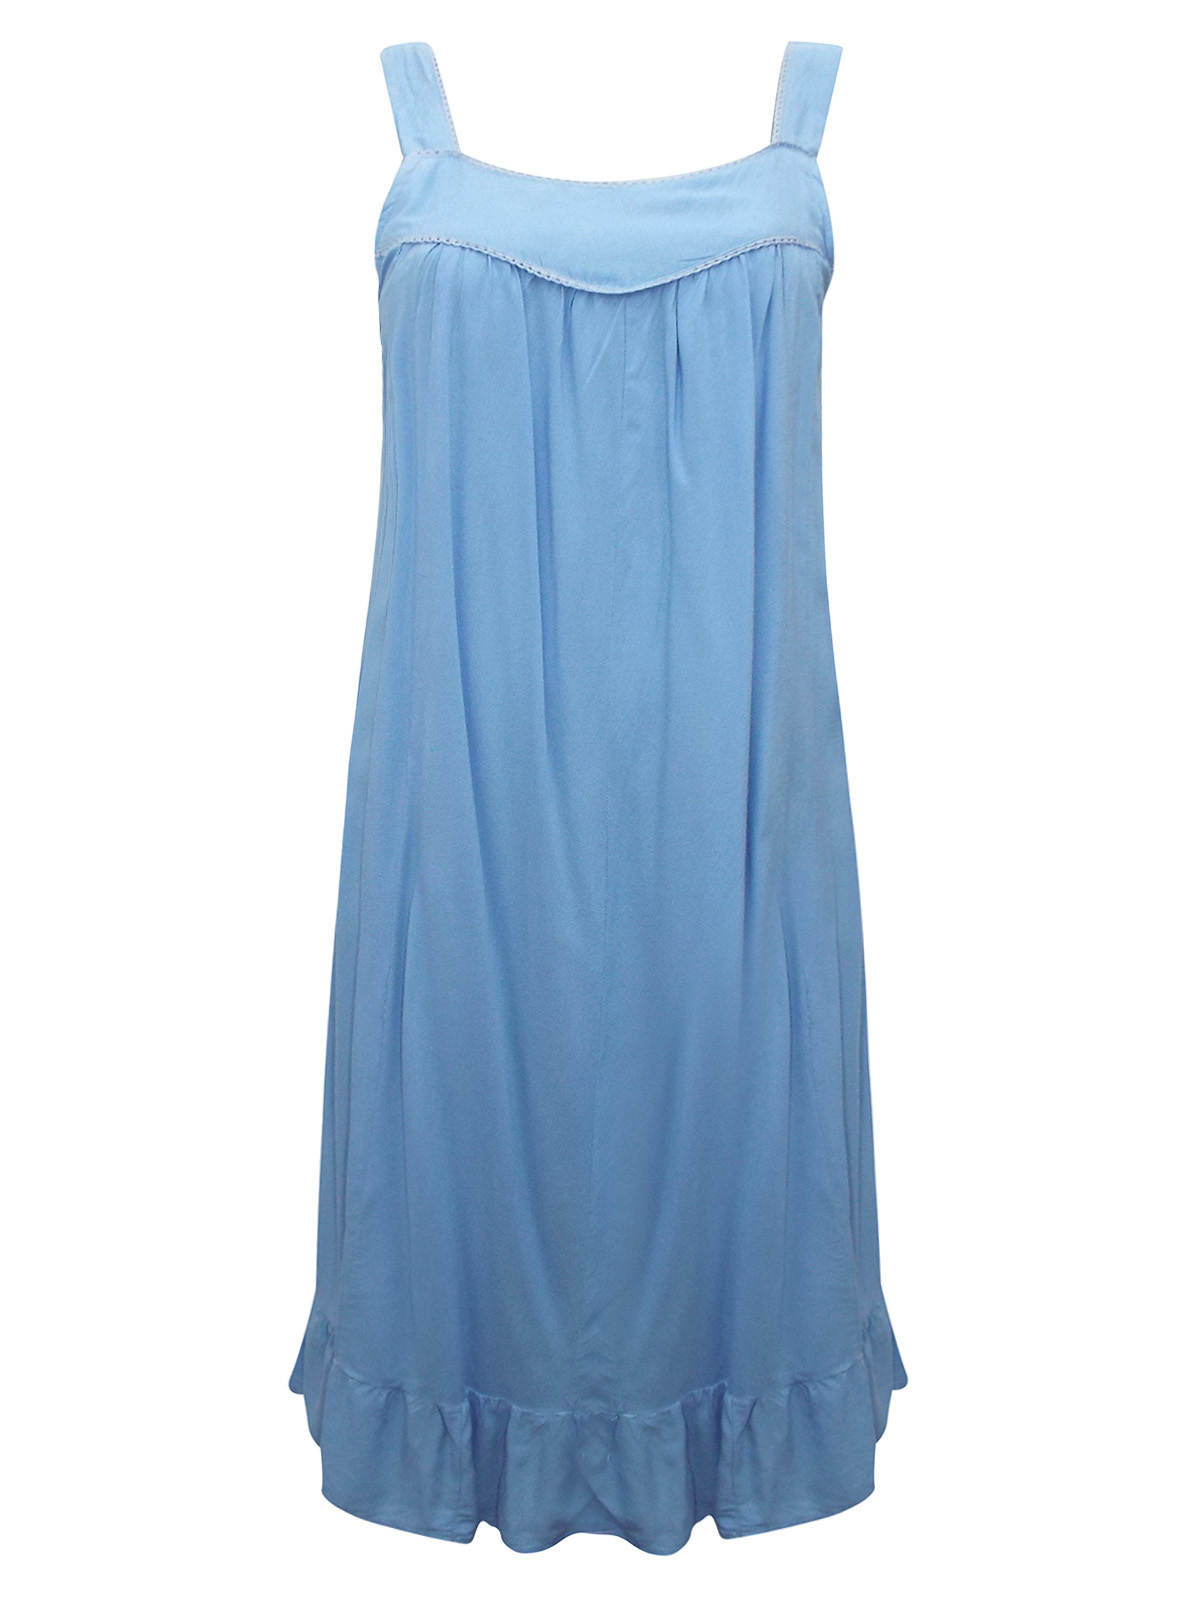 Red Tag - - Red Tag SKY-BLUE Frill Hem Cotton Chemise - Size 10 to 16